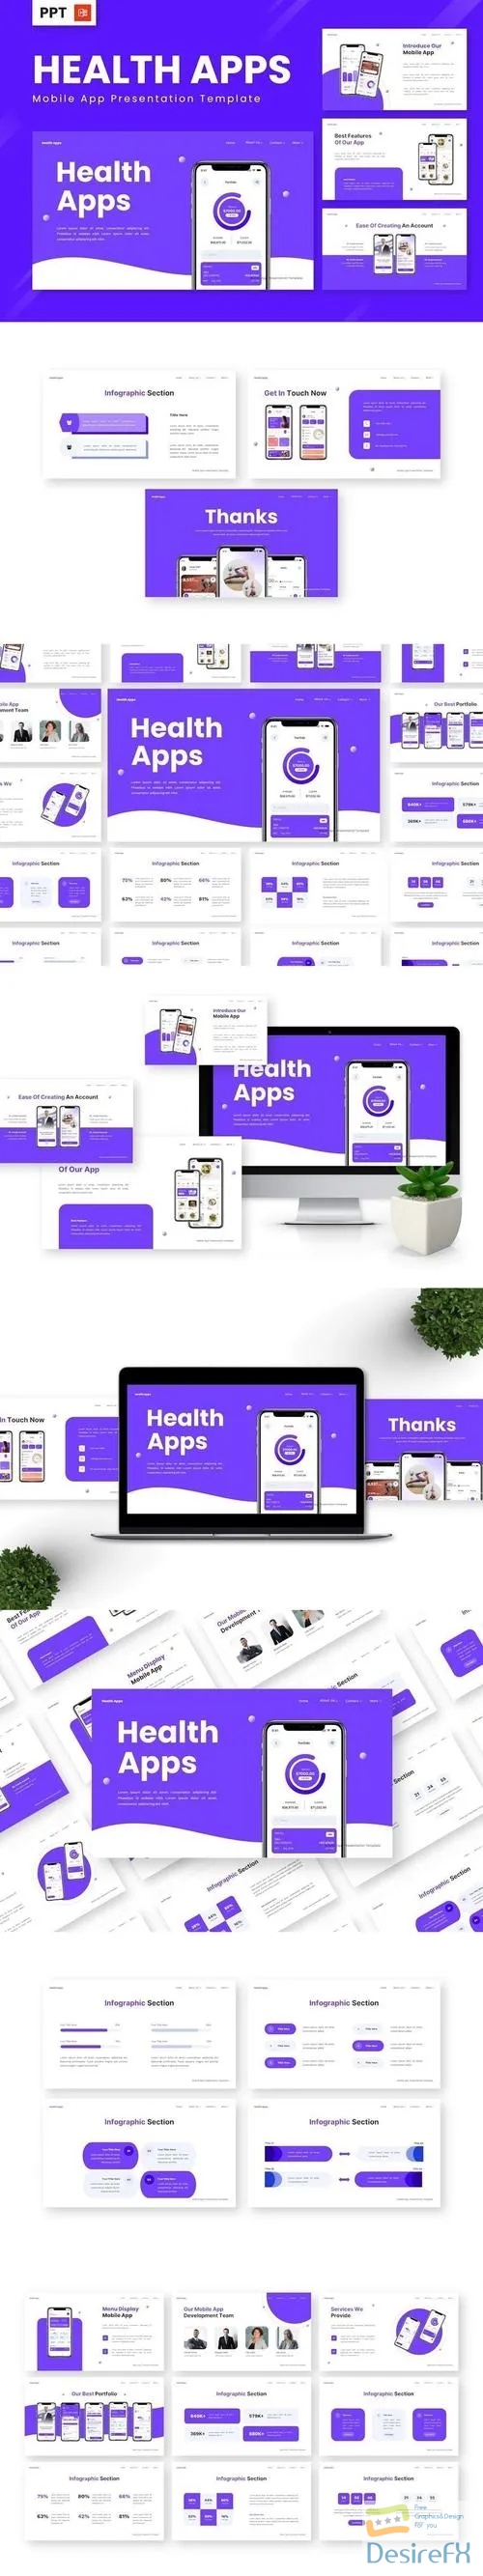 Health Apps - Mobile App Powerpoint Templates